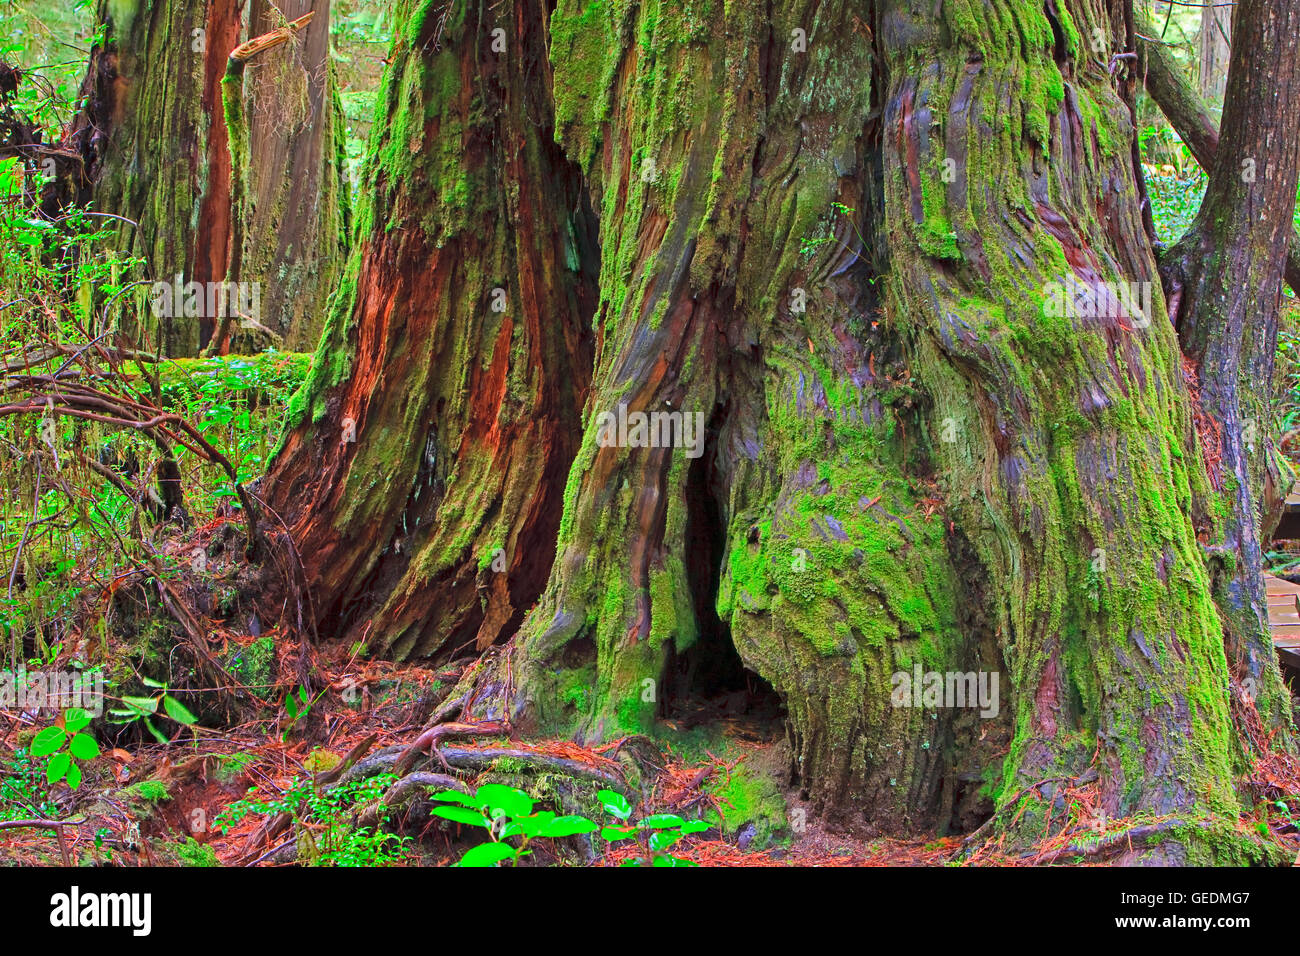 geography / travel, Canada, British Columbia, Moss covered base of a large western redcedar tree (western red cedar), Thuja plicata, along the Rainforest Trail in the coastal Stock Photo